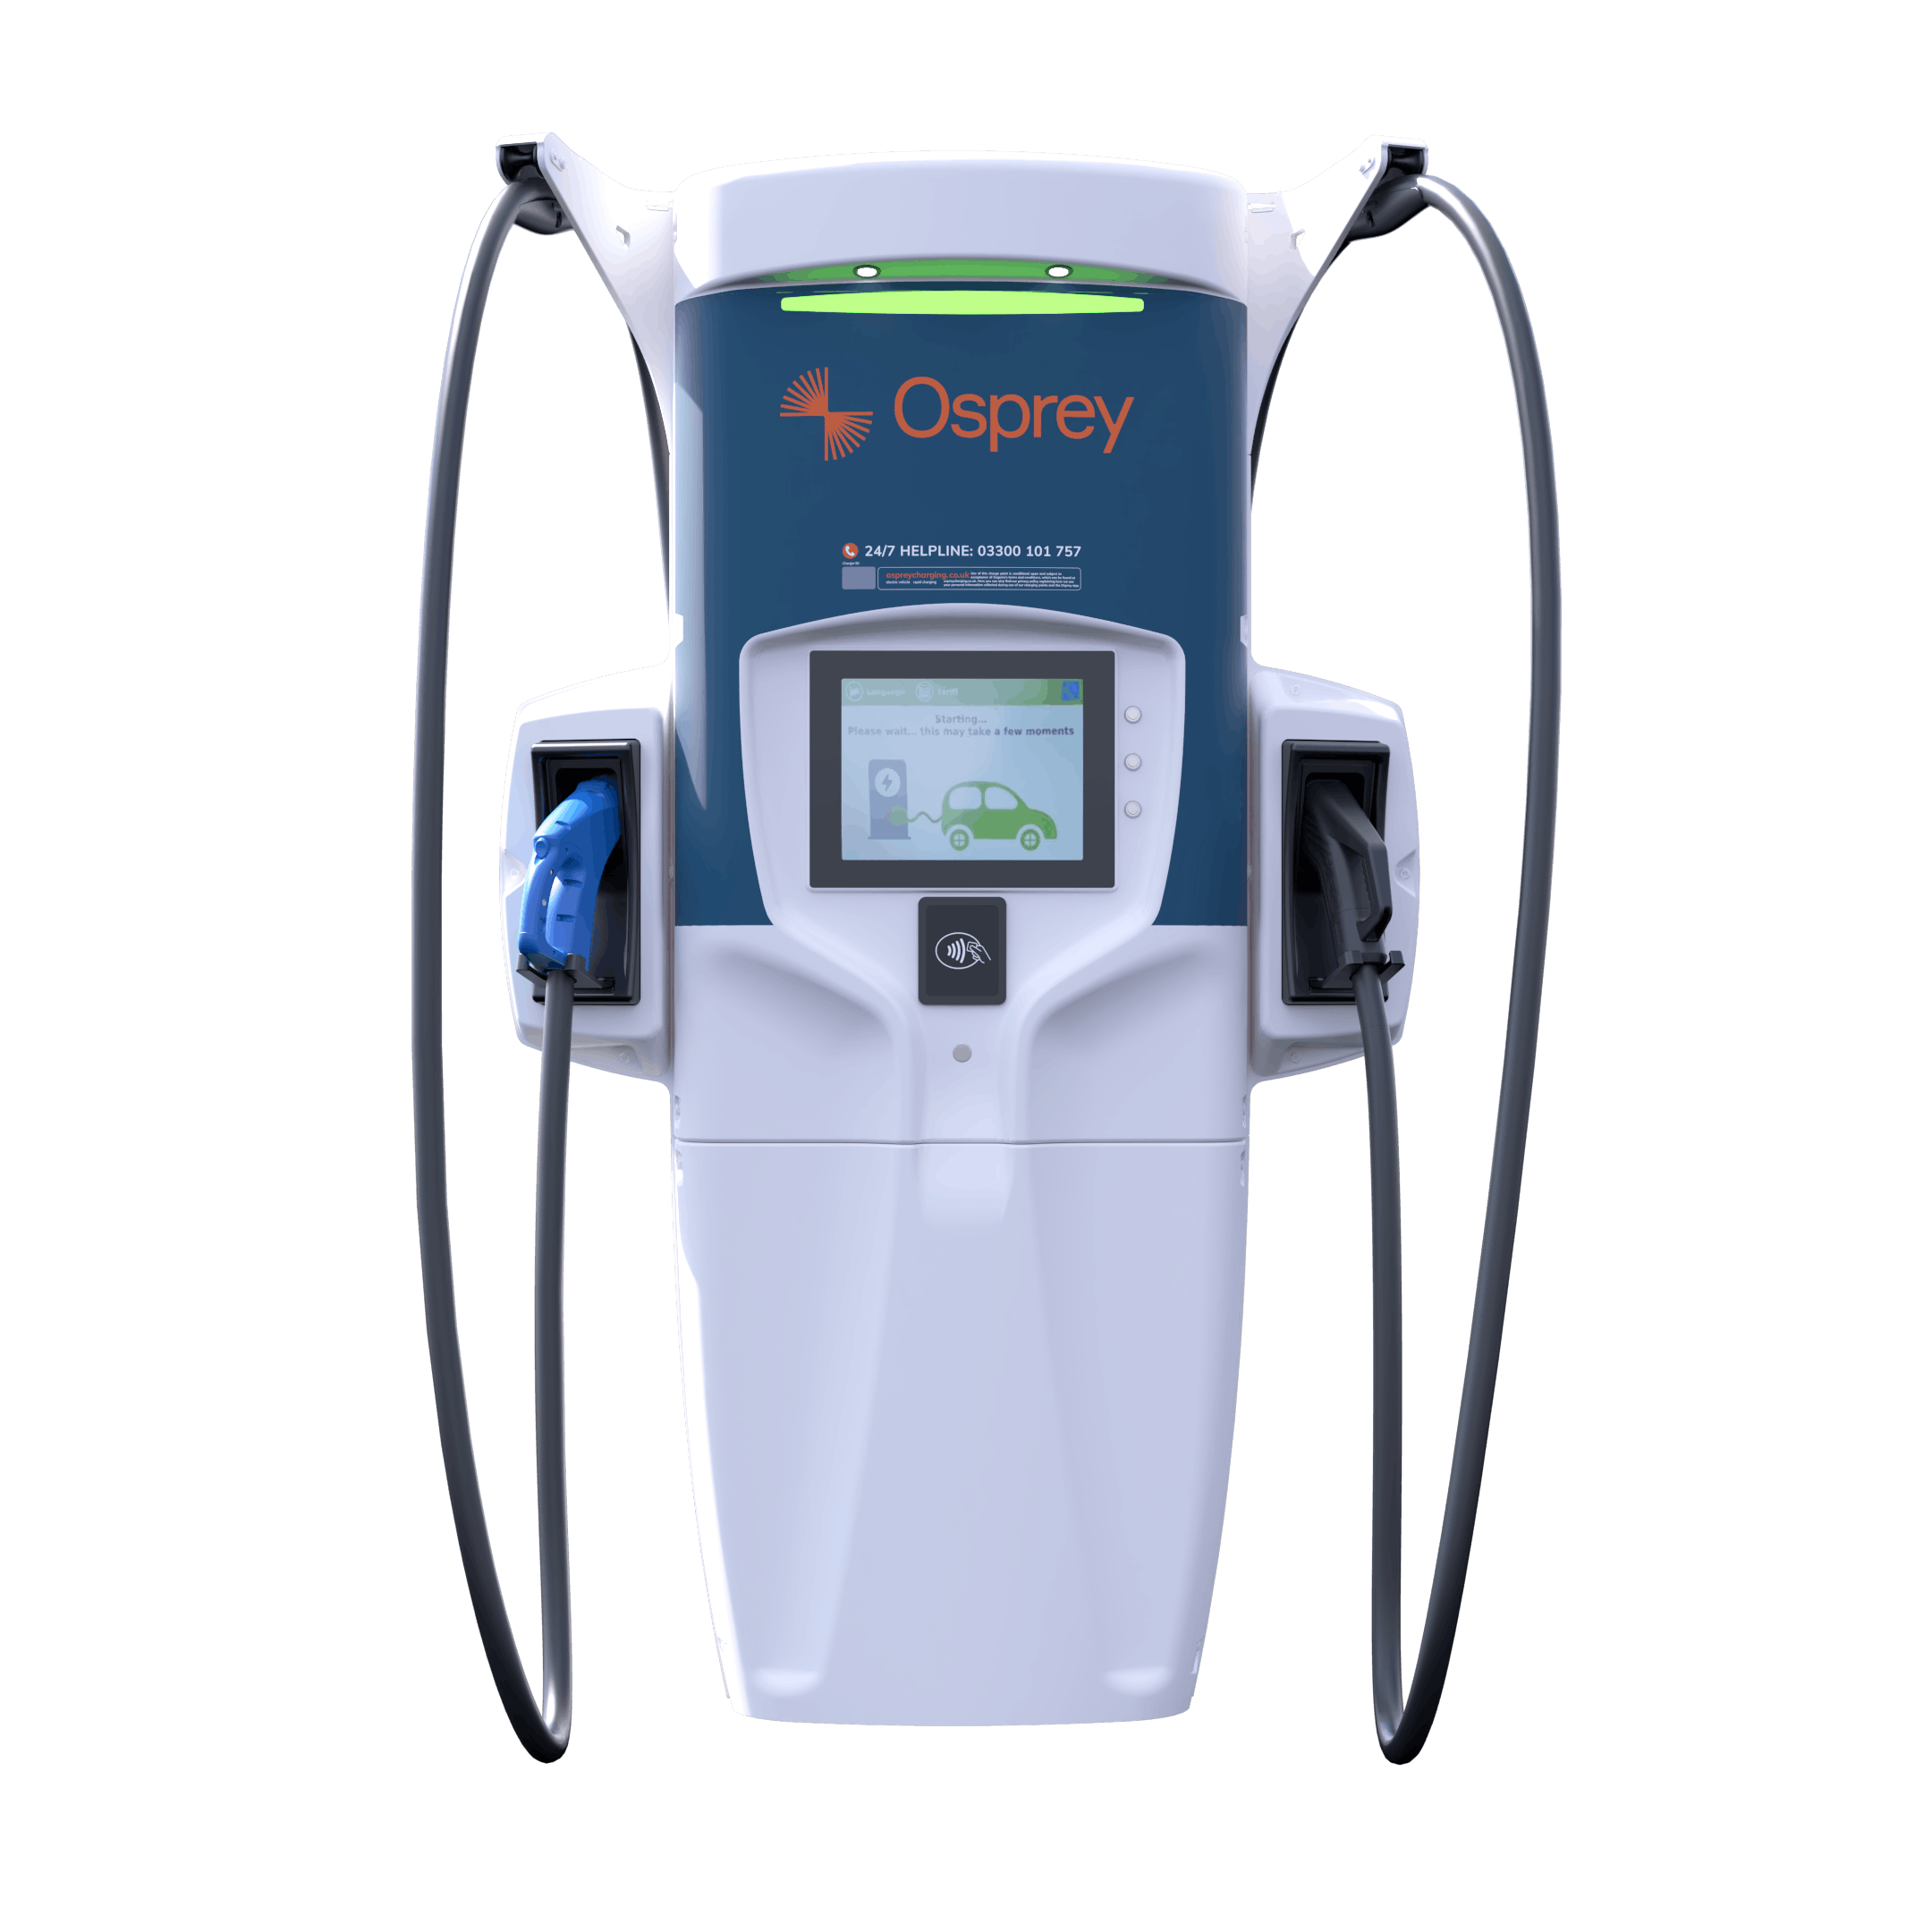 Osprey 175kW charger